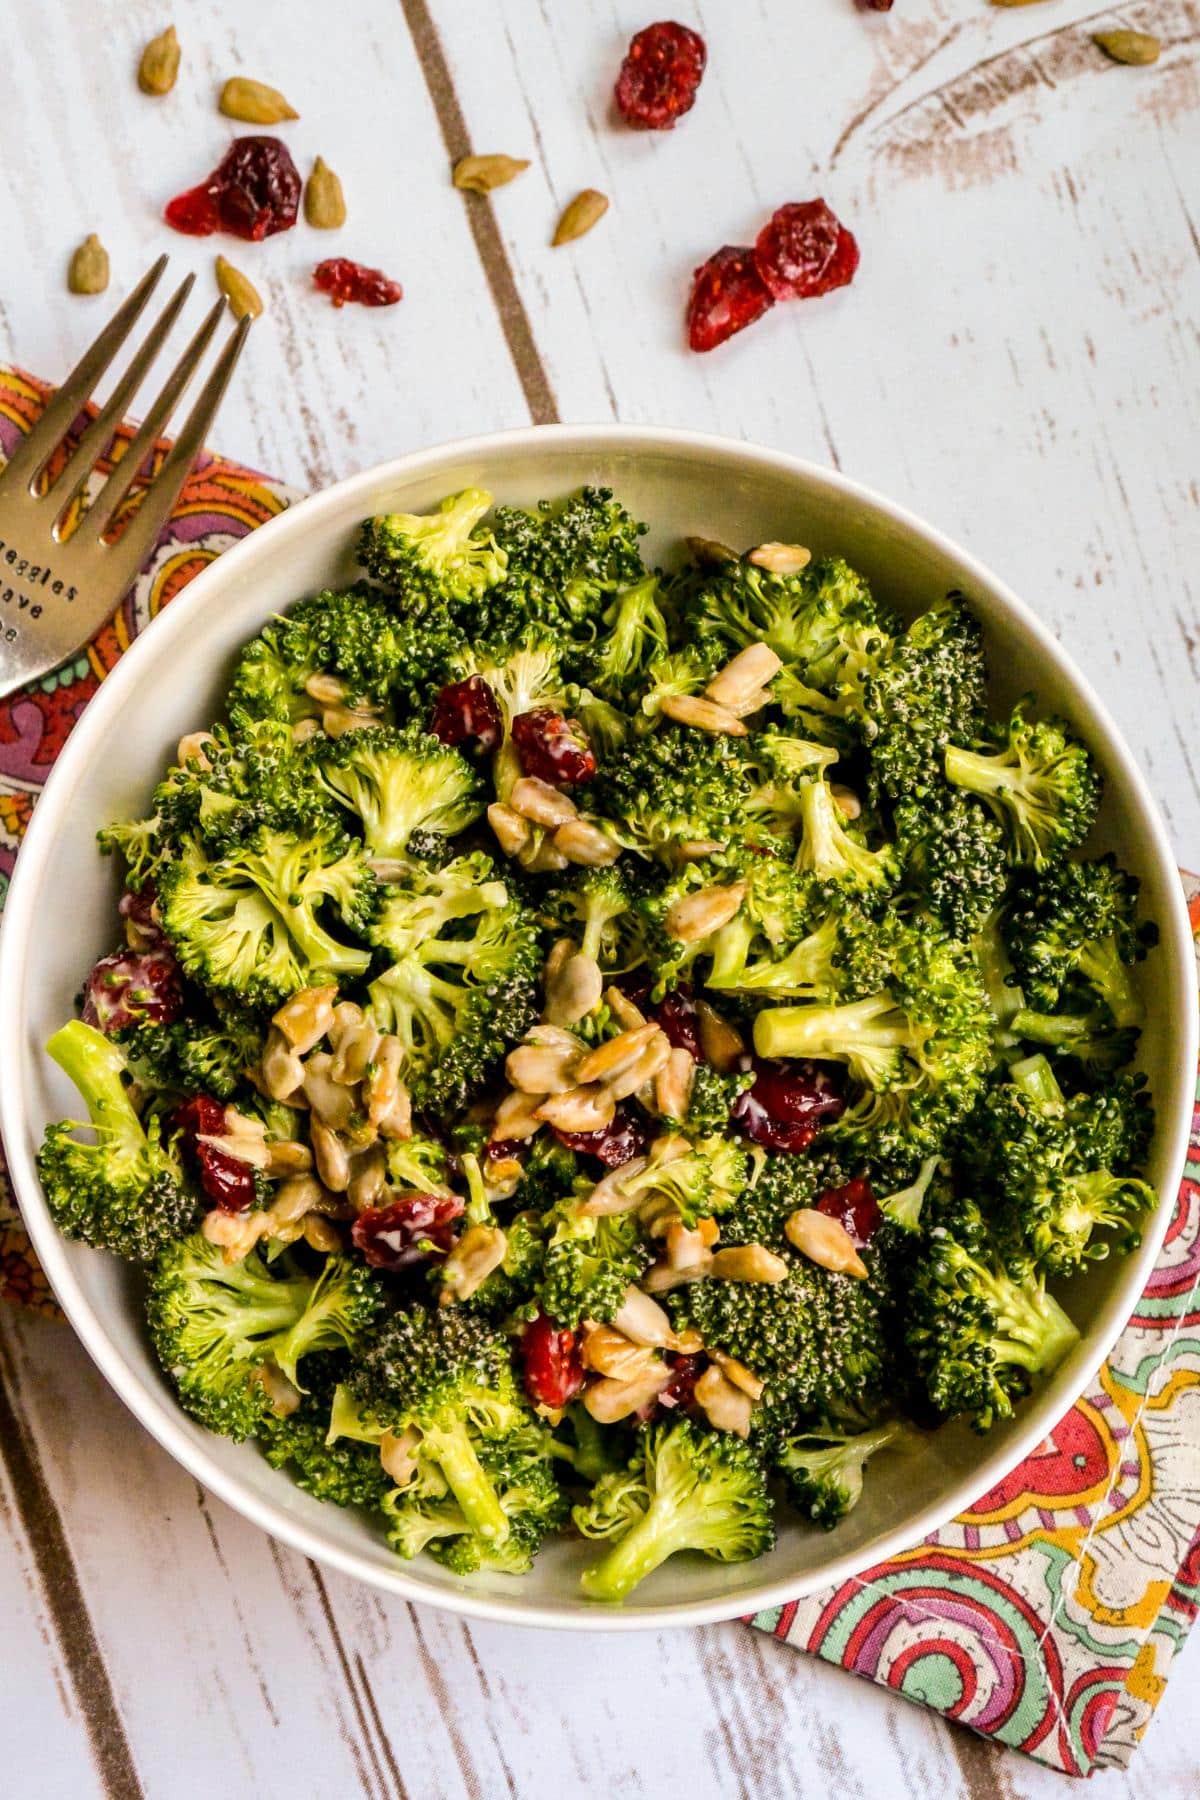 Bowl of broccoli salad with some scattered dried cranberries and sunflower seeds.